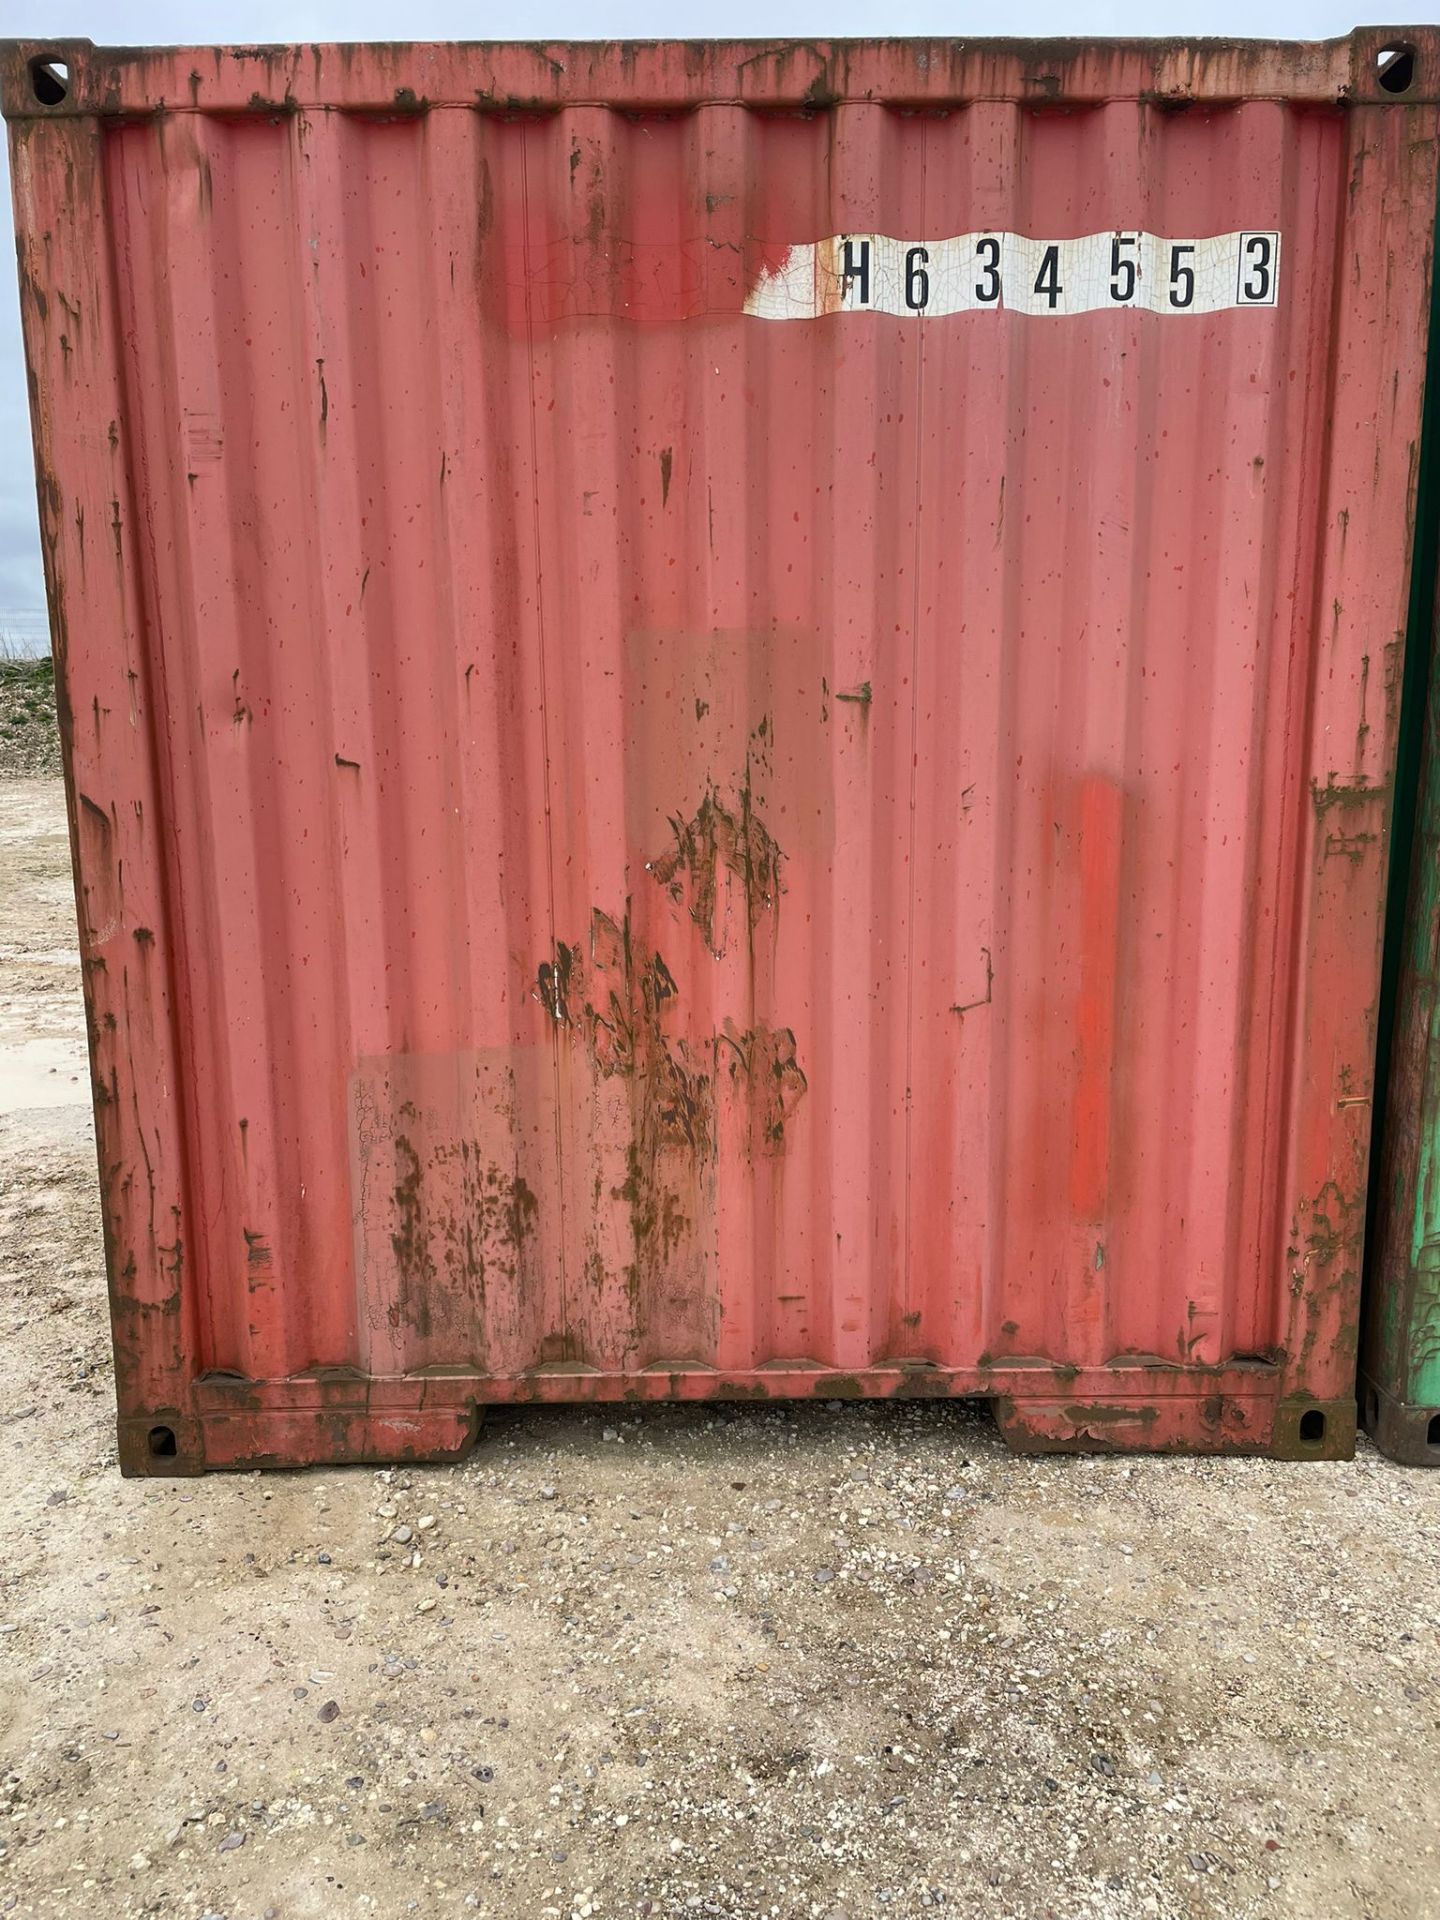 Shipping Container - ref 4634553 - NO RESERVE (40’ GP - Standard) - Image 4 of 4